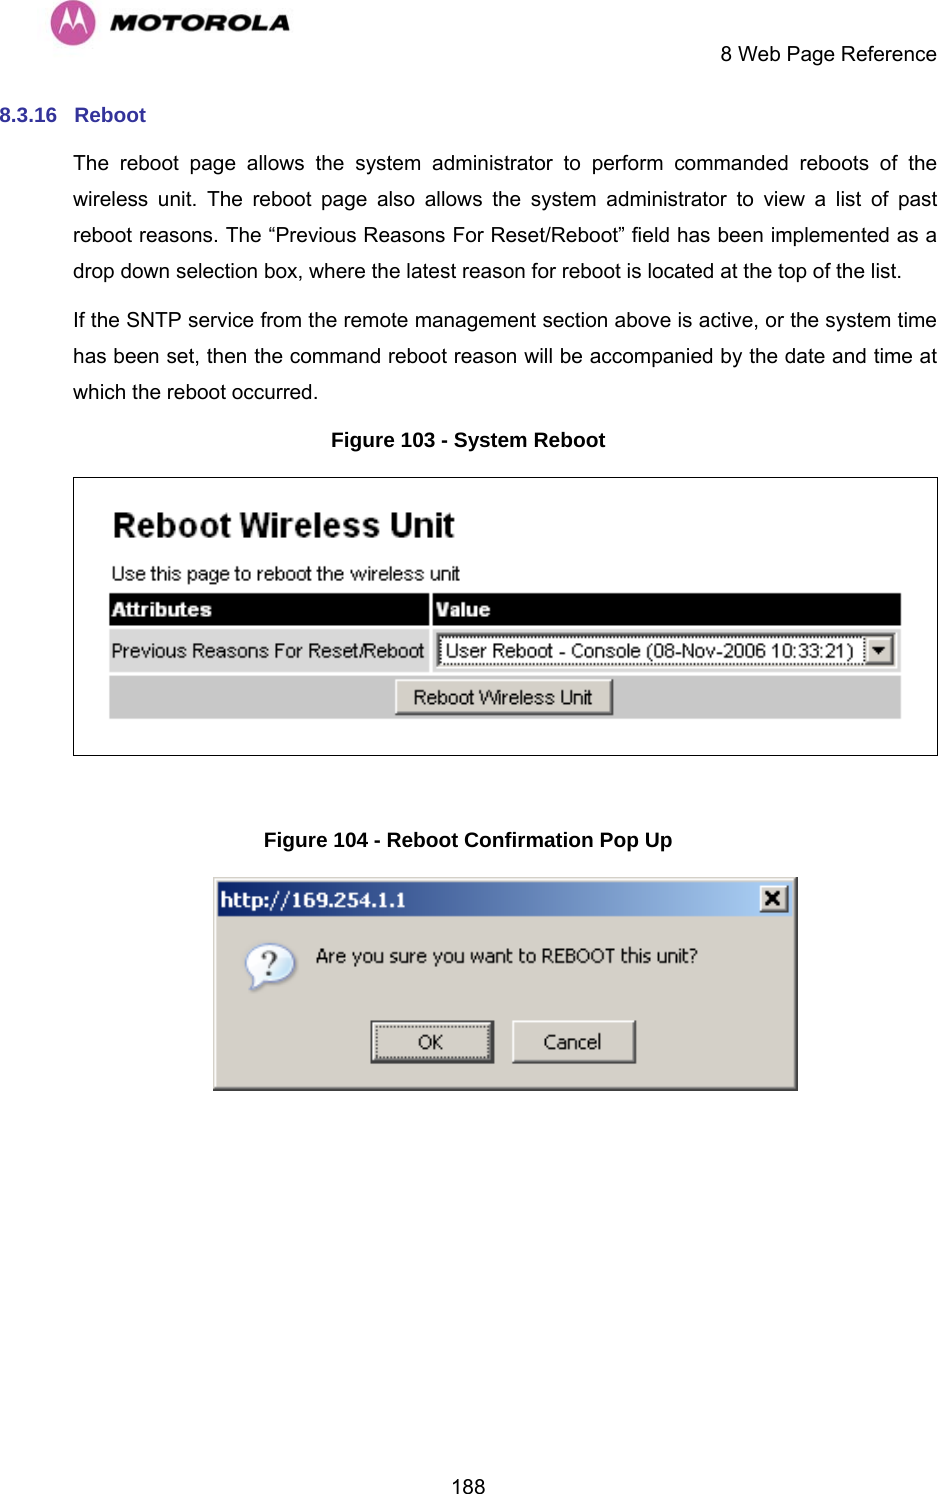     8 Web Page Reference  1888.3.16  Reboot  The reboot page allows the system administrator to perform commanded reboots of the wireless unit. The reboot page also allows the system administrator to view a list of past reboot reasons. The “Previous Reasons For Reset/Reboot” field has been implemented as a drop down selection box, where the latest reason for reboot is located at the top of the list. If the SNTP service from the remote management section above is active, or the system time has been set, then the command reboot reason will be accompanied by the date and time at which the reboot occurred. Figure 103 - System Reboot   Figure 104 - Reboot Confirmation Pop Up   